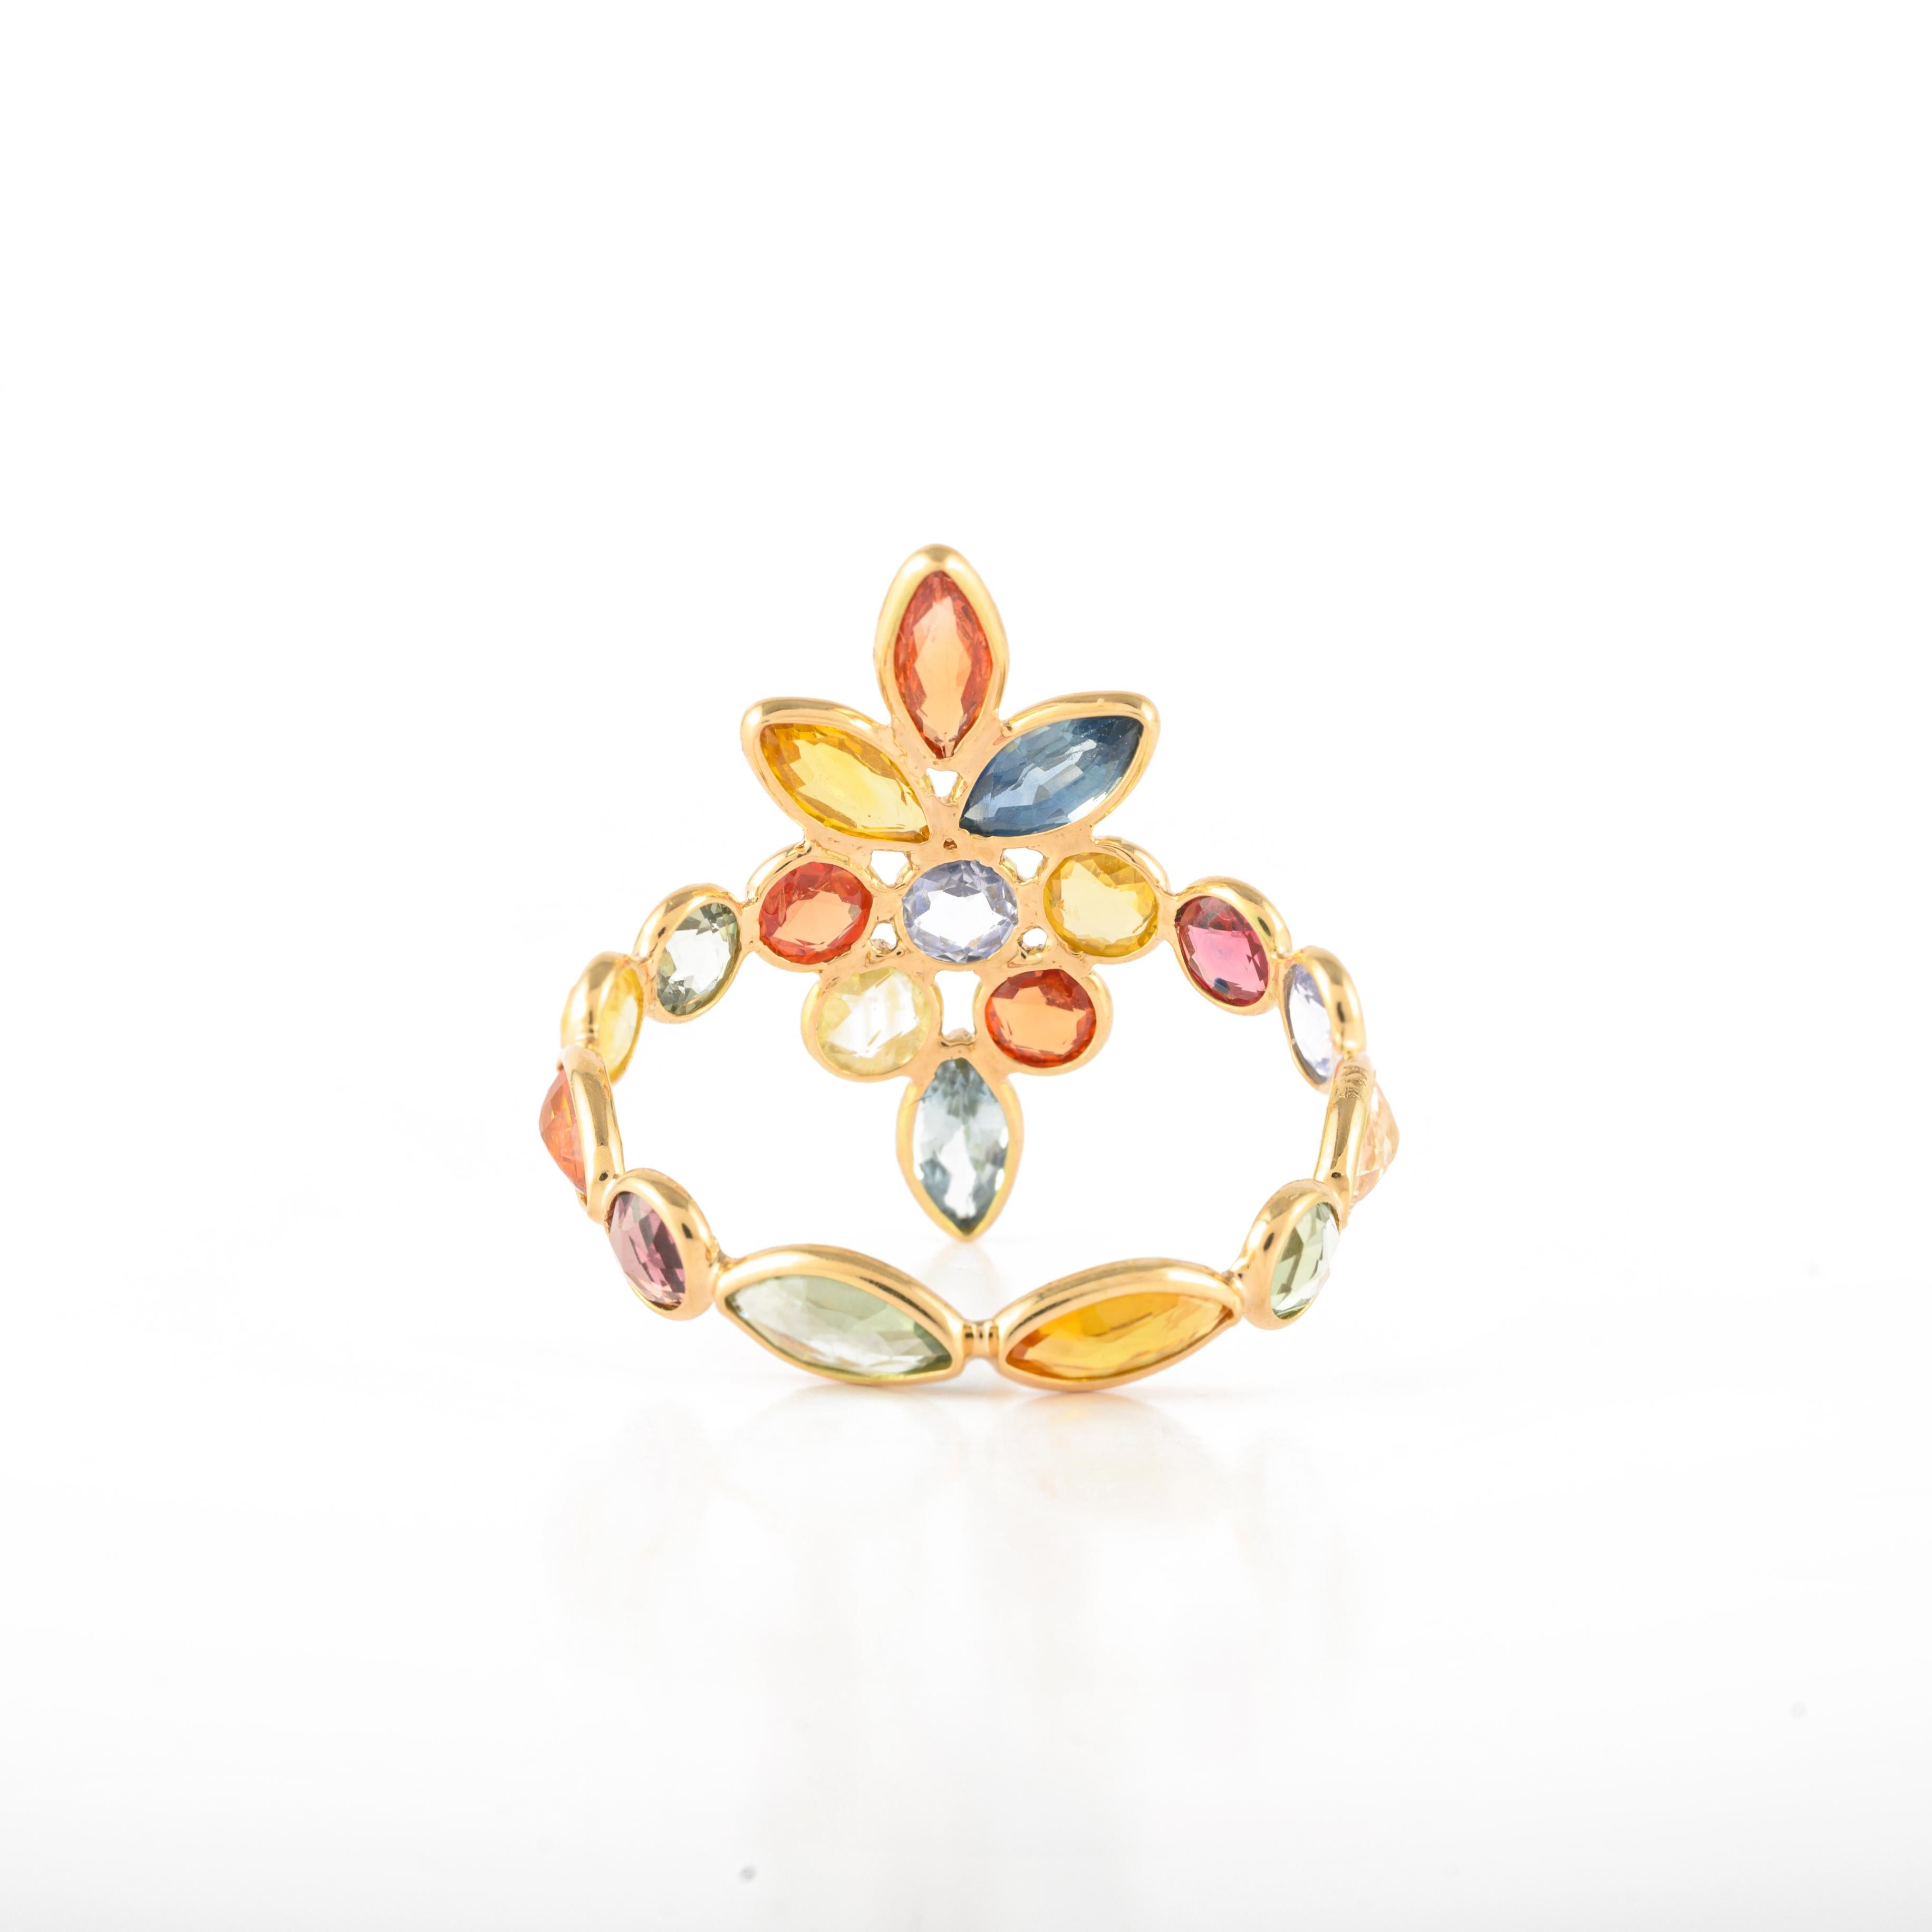 For Sale:  4.81ct Multi Sapphire Elongated Floral Ring in 14k Solid Yellow Gold 7